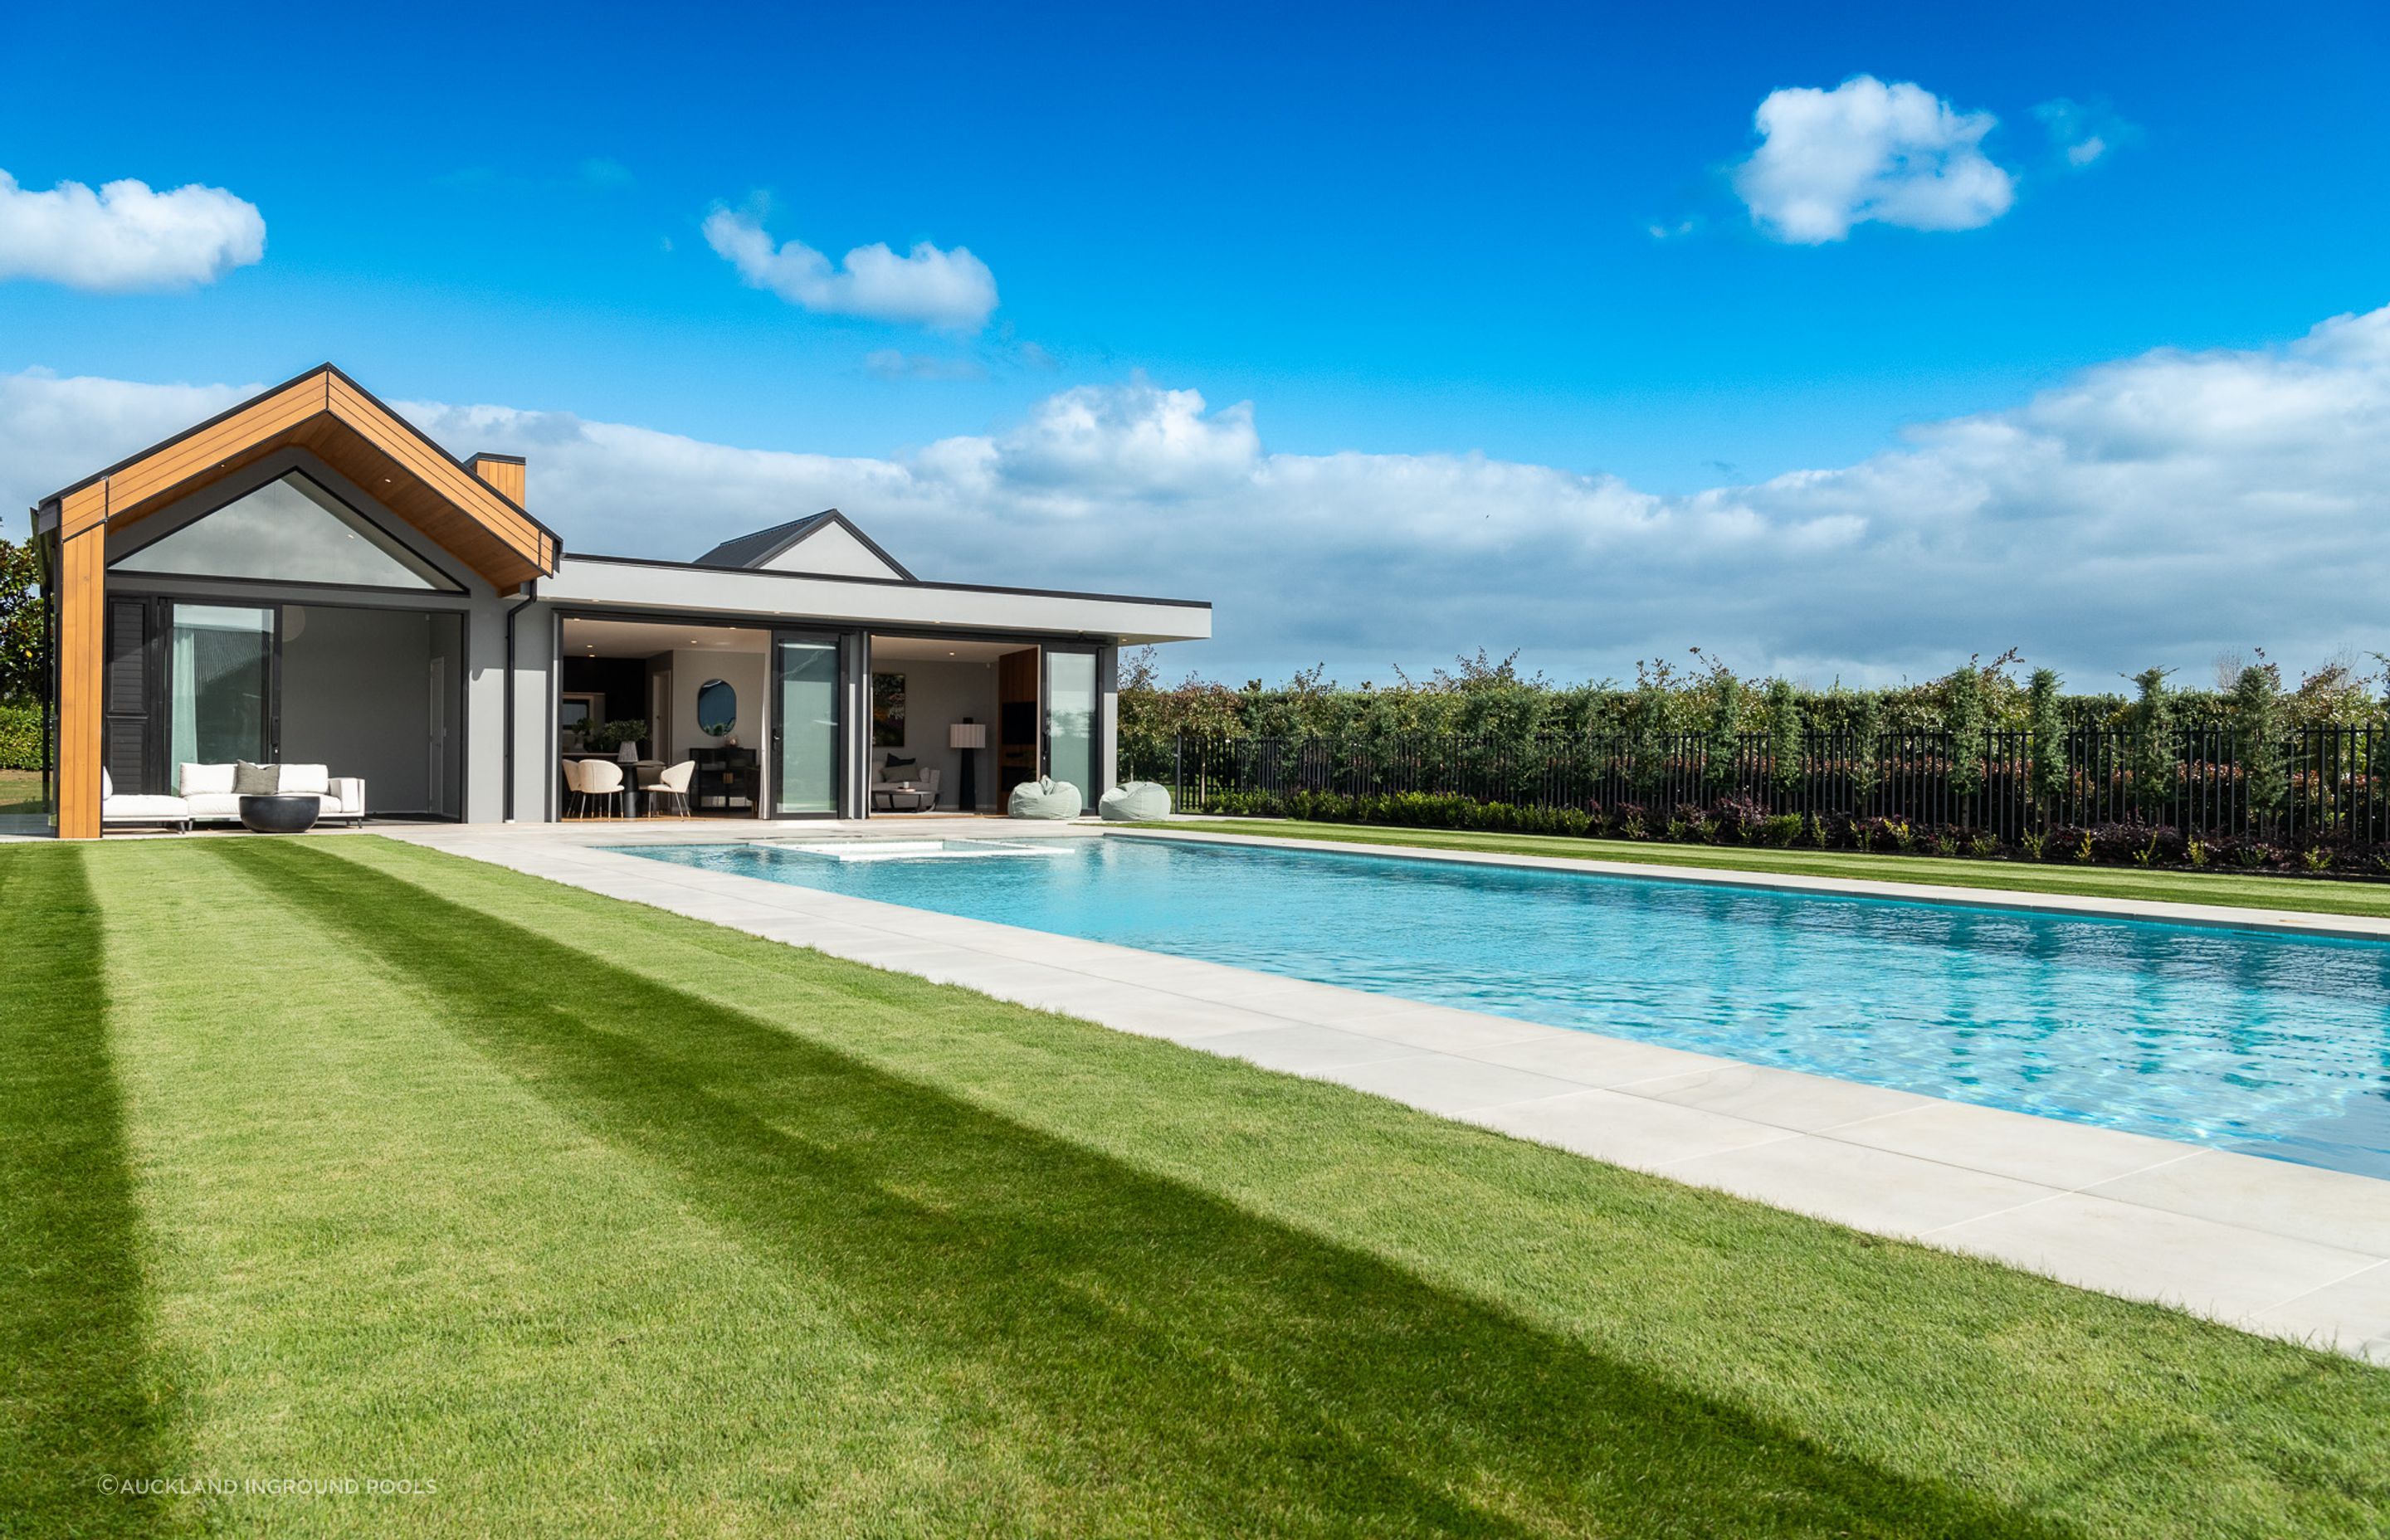 15m x 6m Pool in Rural South Auckland with Integrated Spa Pool - all able to be remotely viewed and controlled anywhere in the world, at anytime.